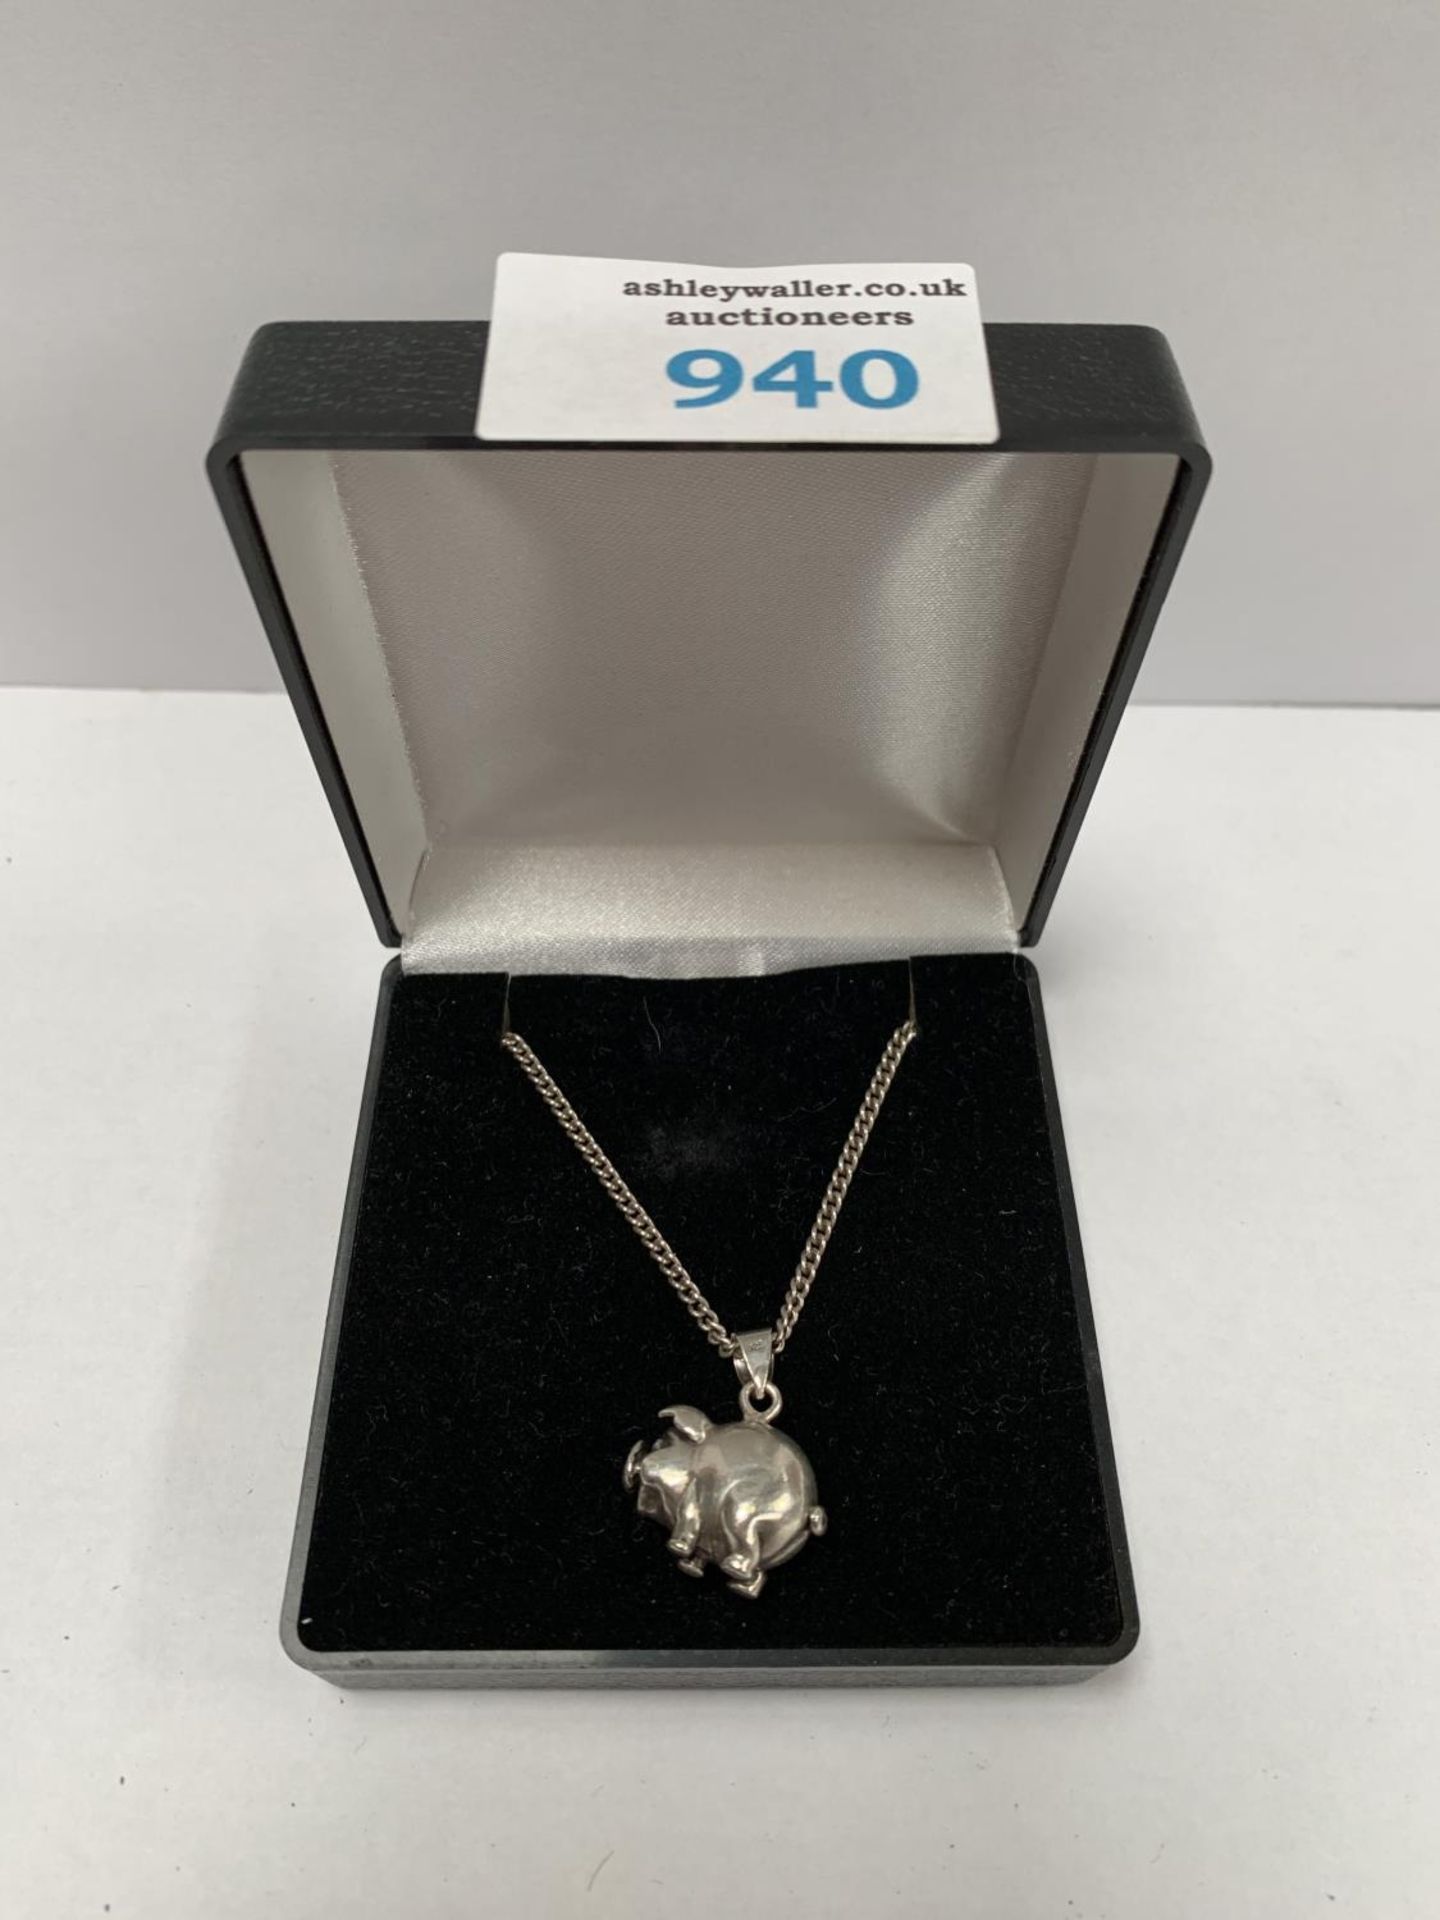 A BOXED SILVER NECKLACE WITH PIG PENDANT